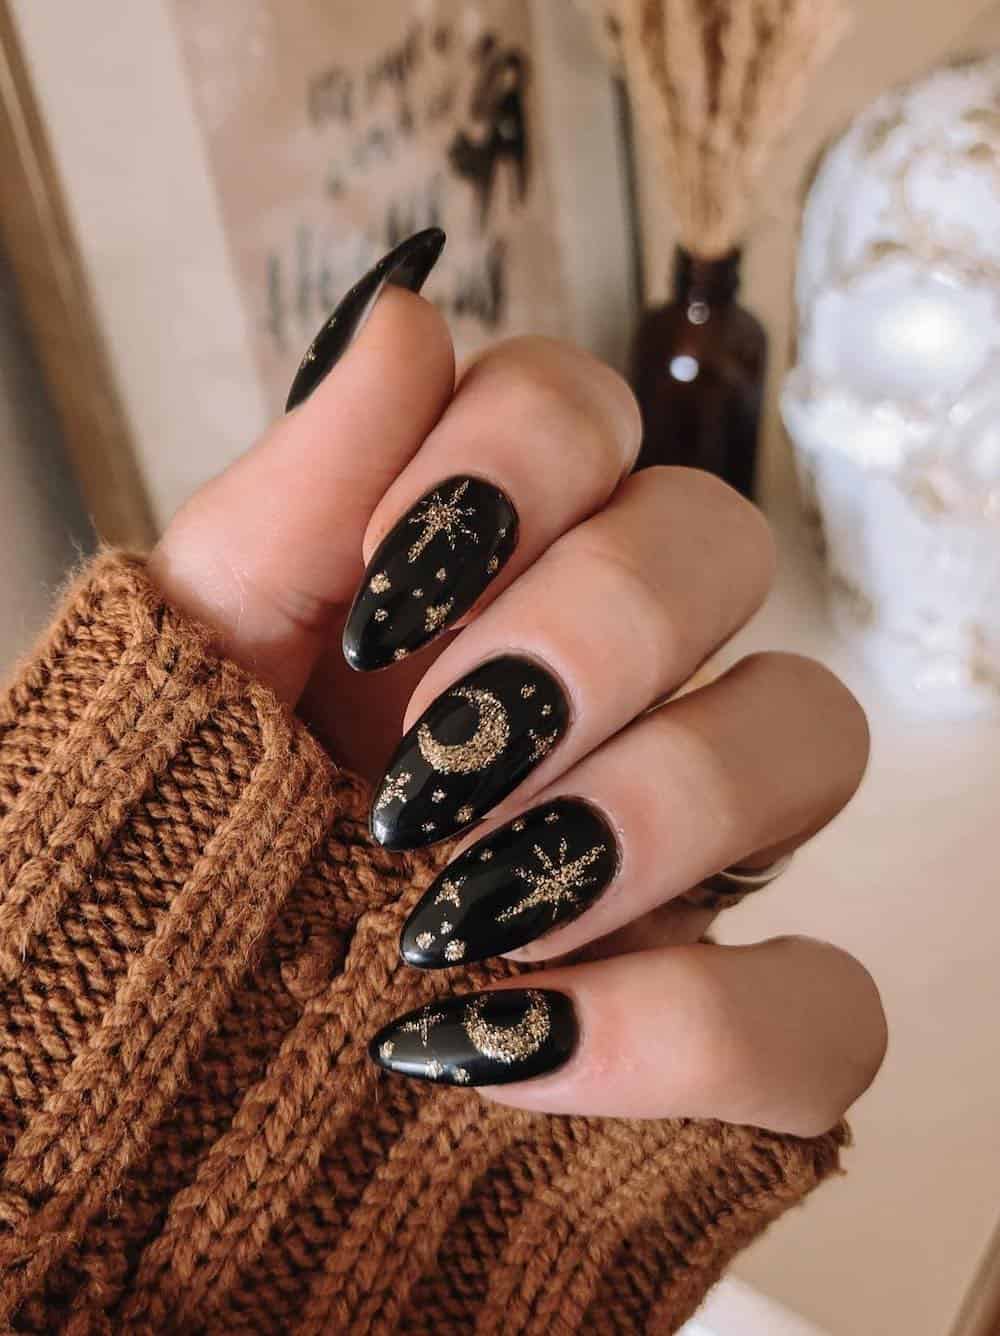 long black almond nails with gold glitter stars and moons